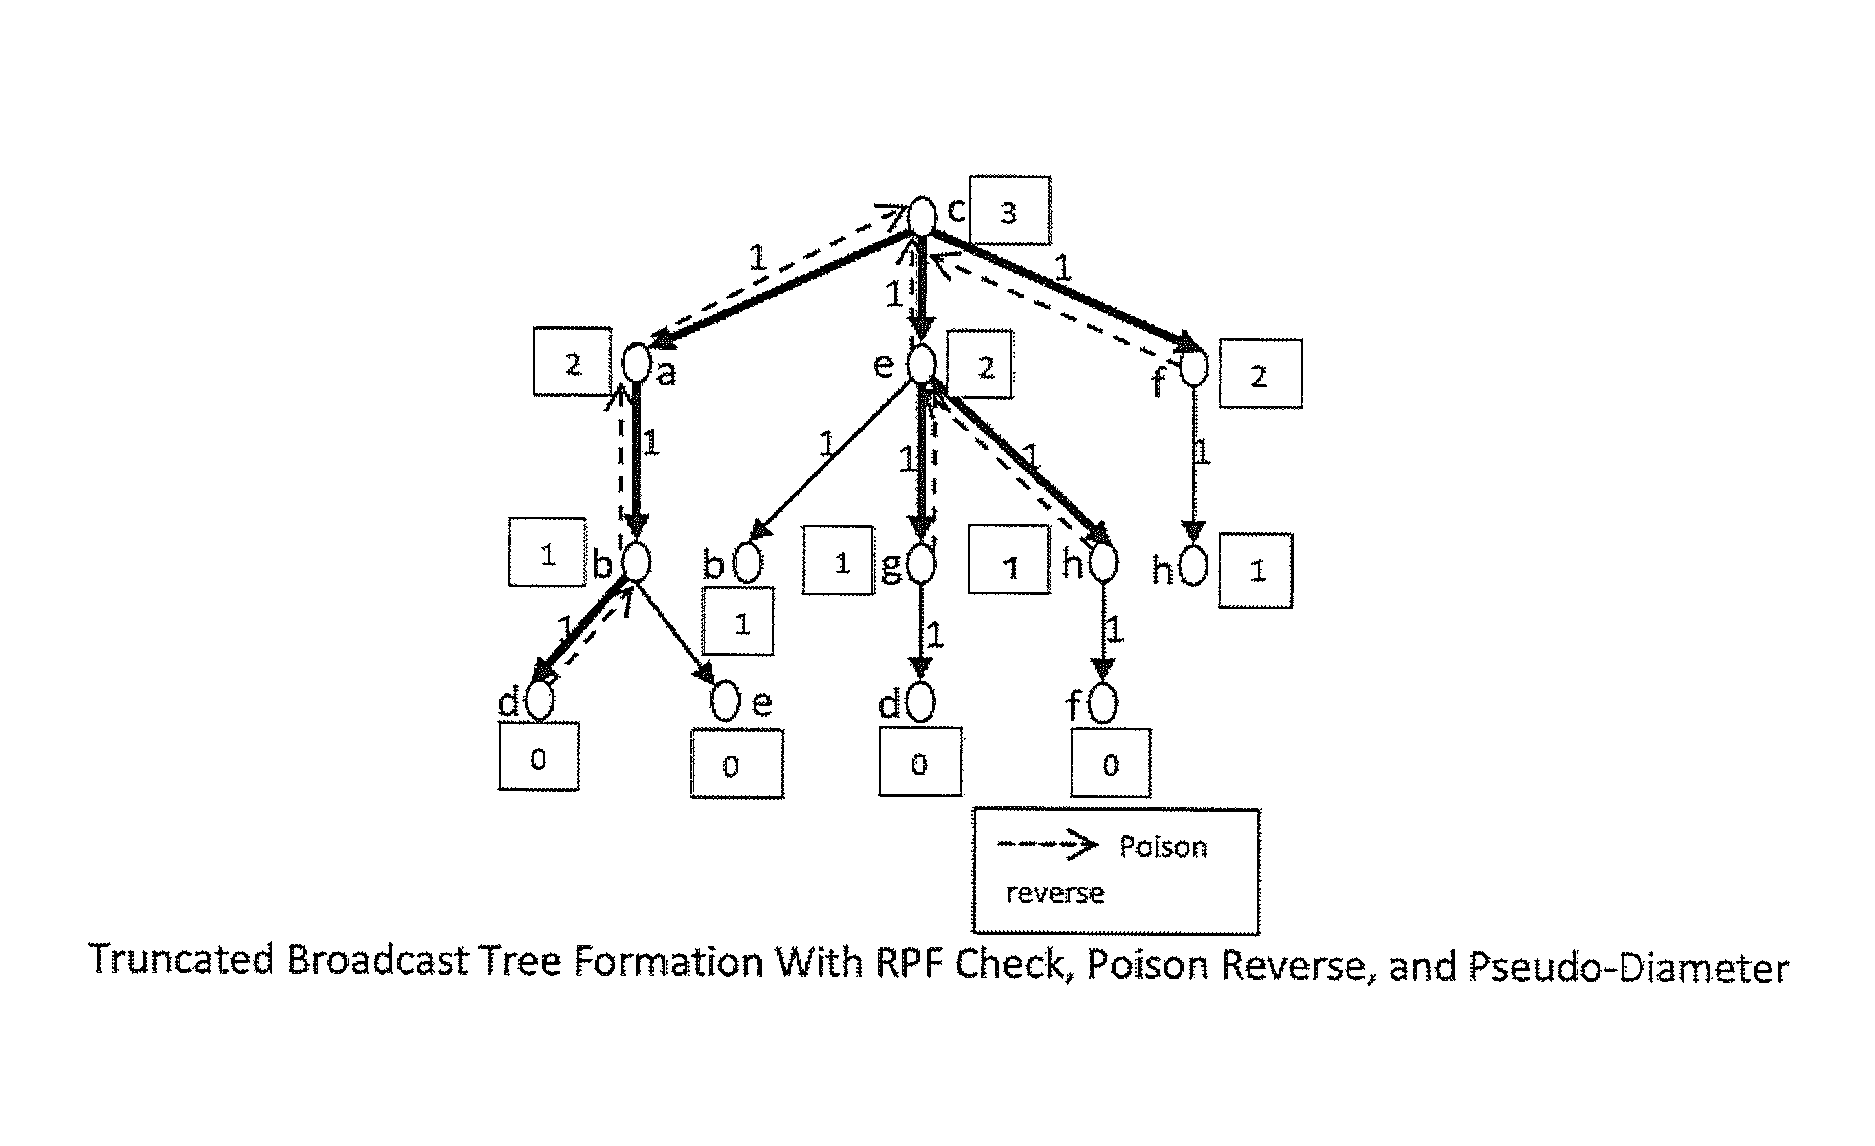 Multicast routing protocol for computer networks